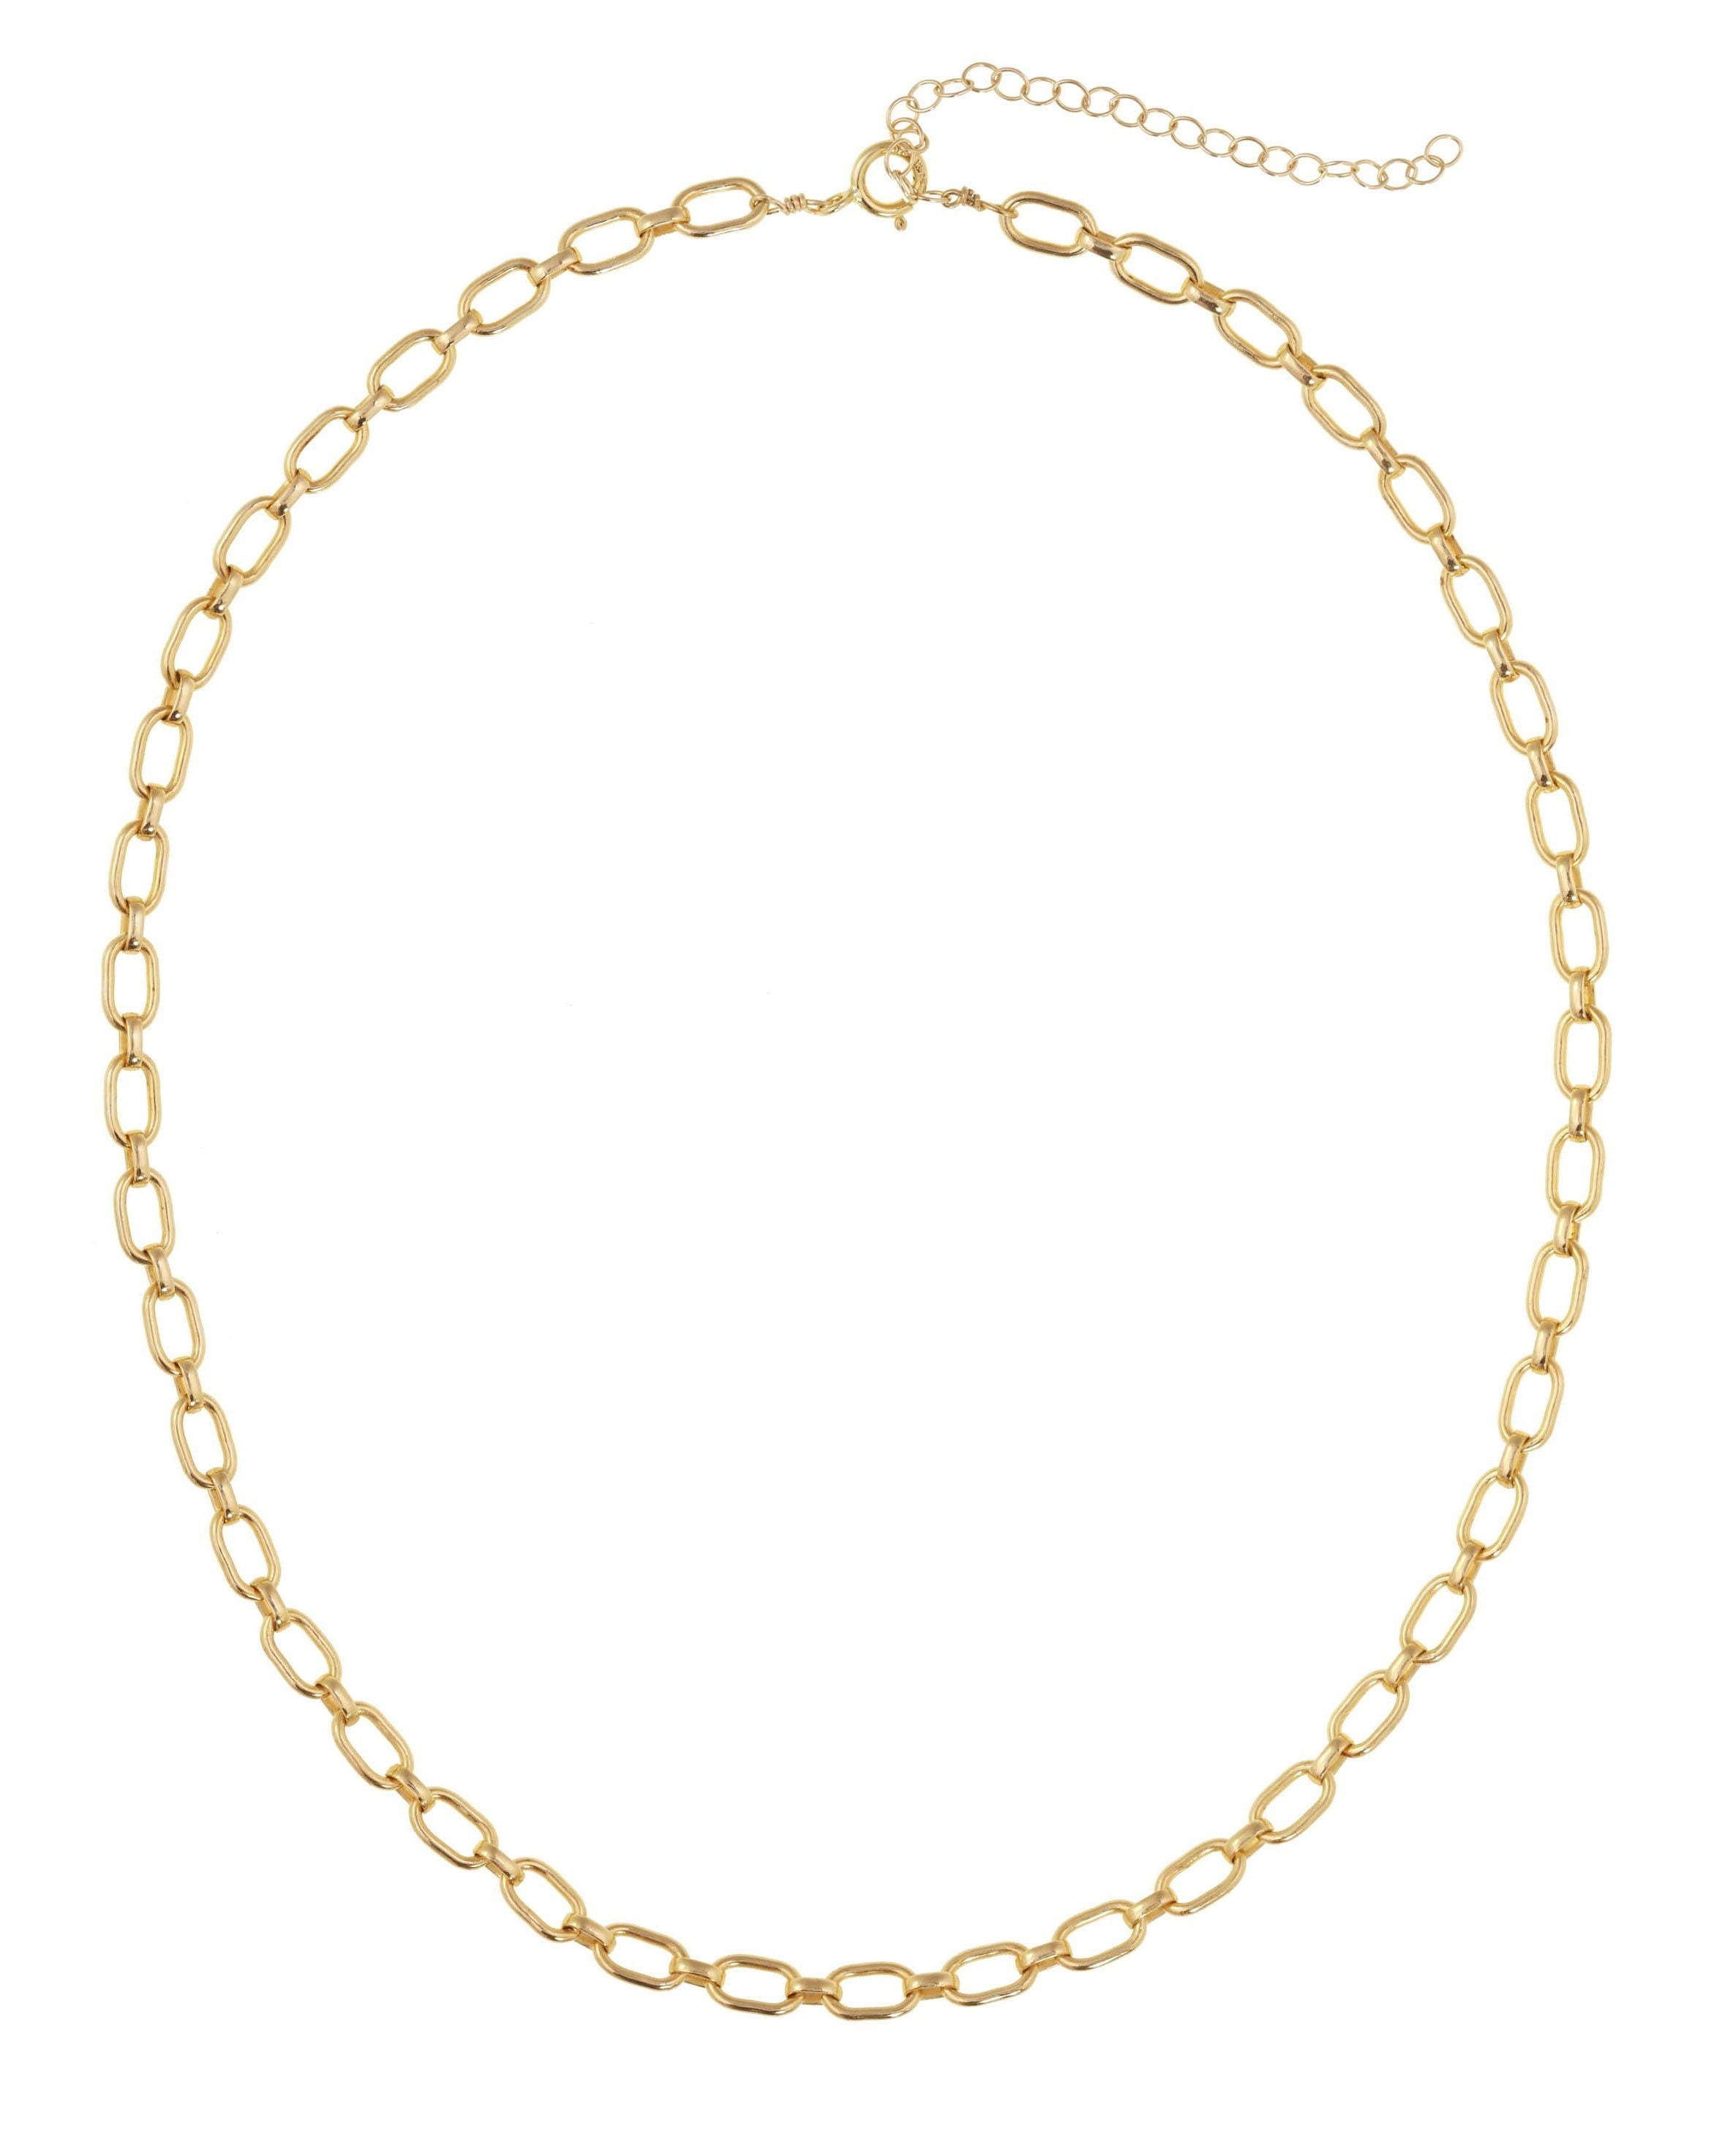 Calle Chain Necklace by KOZAKH. A 14 to 16 inch adjustable length chain necklace in 14K Gold Filled.